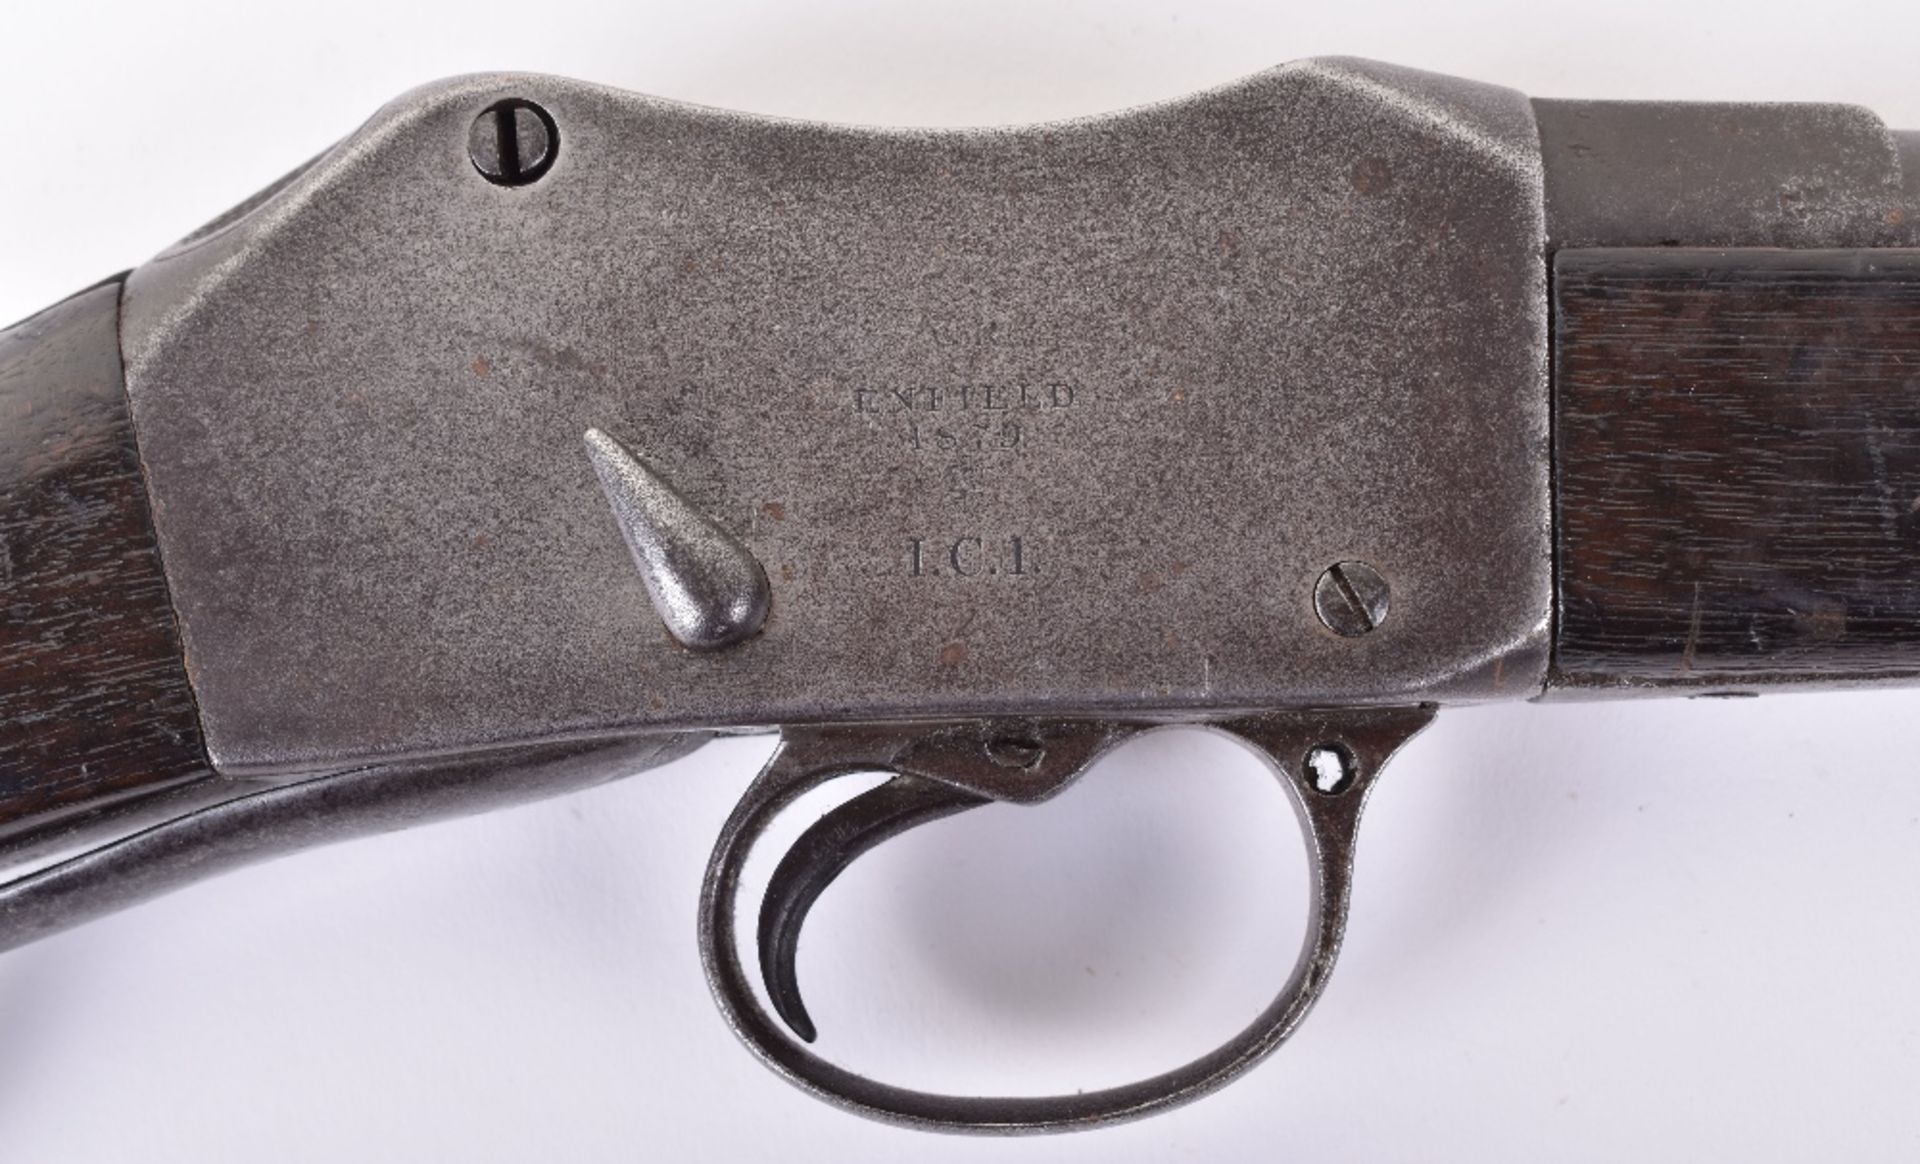 A .477/.550 Martini-Henry I.C.1 cavalry carbine - Image 2 of 12